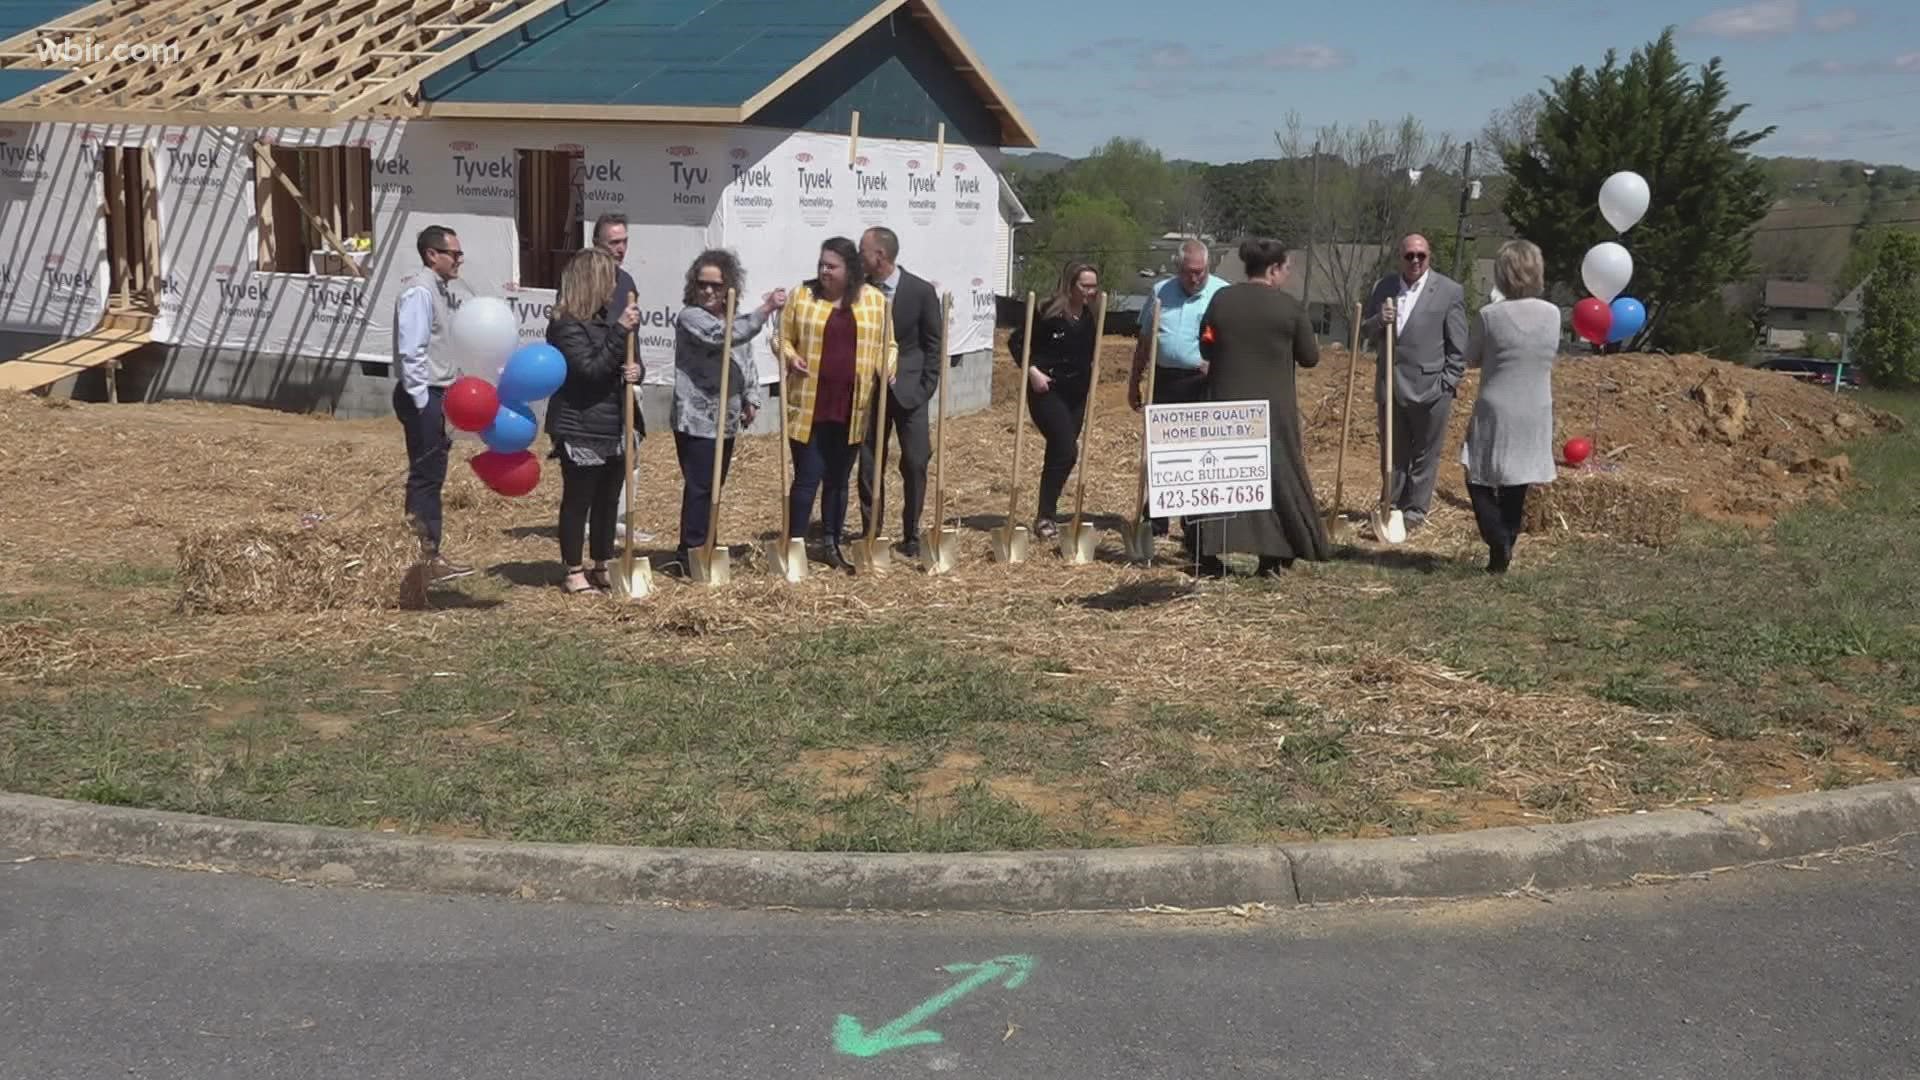 Groups say there is a desperate need for more affordable housing in Tennessee and they are working to meet that need.